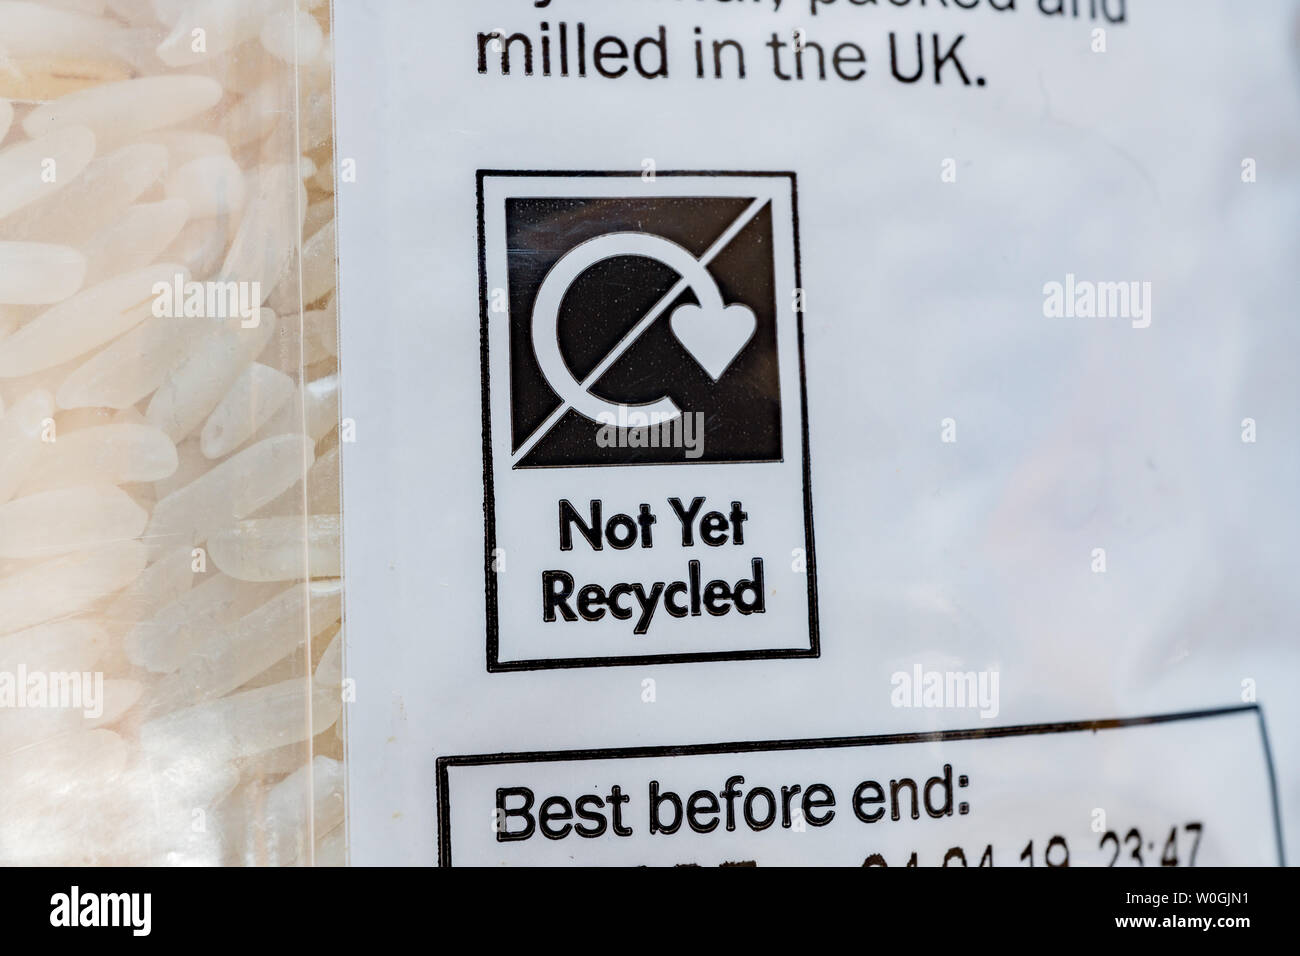 Dried food in non recyclable plastic packaging. UK Stock Photo